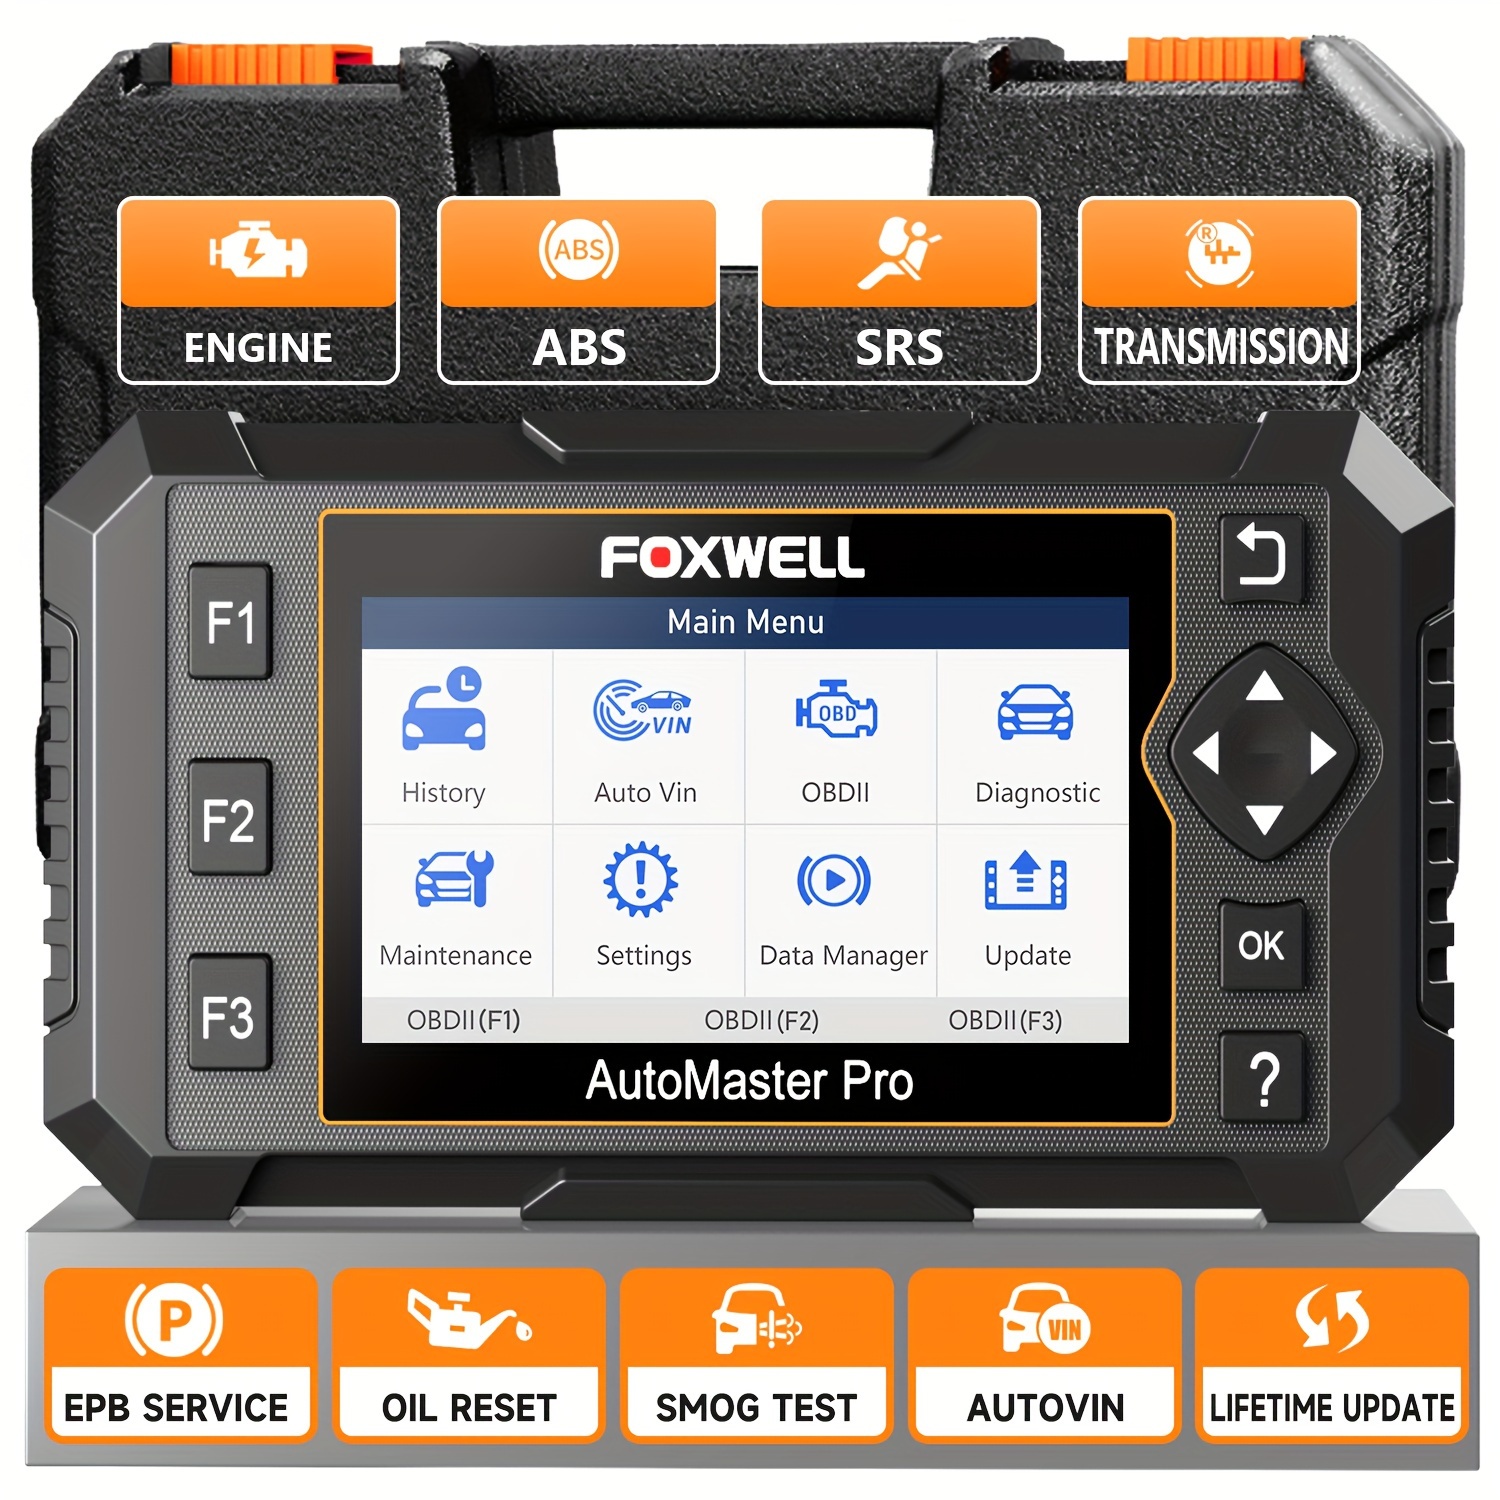 FOXWELL NT604 Elite OBD2 Diagnostic Tool Automotive Scanner ABS SRS Check  Engine Code Reader Tools